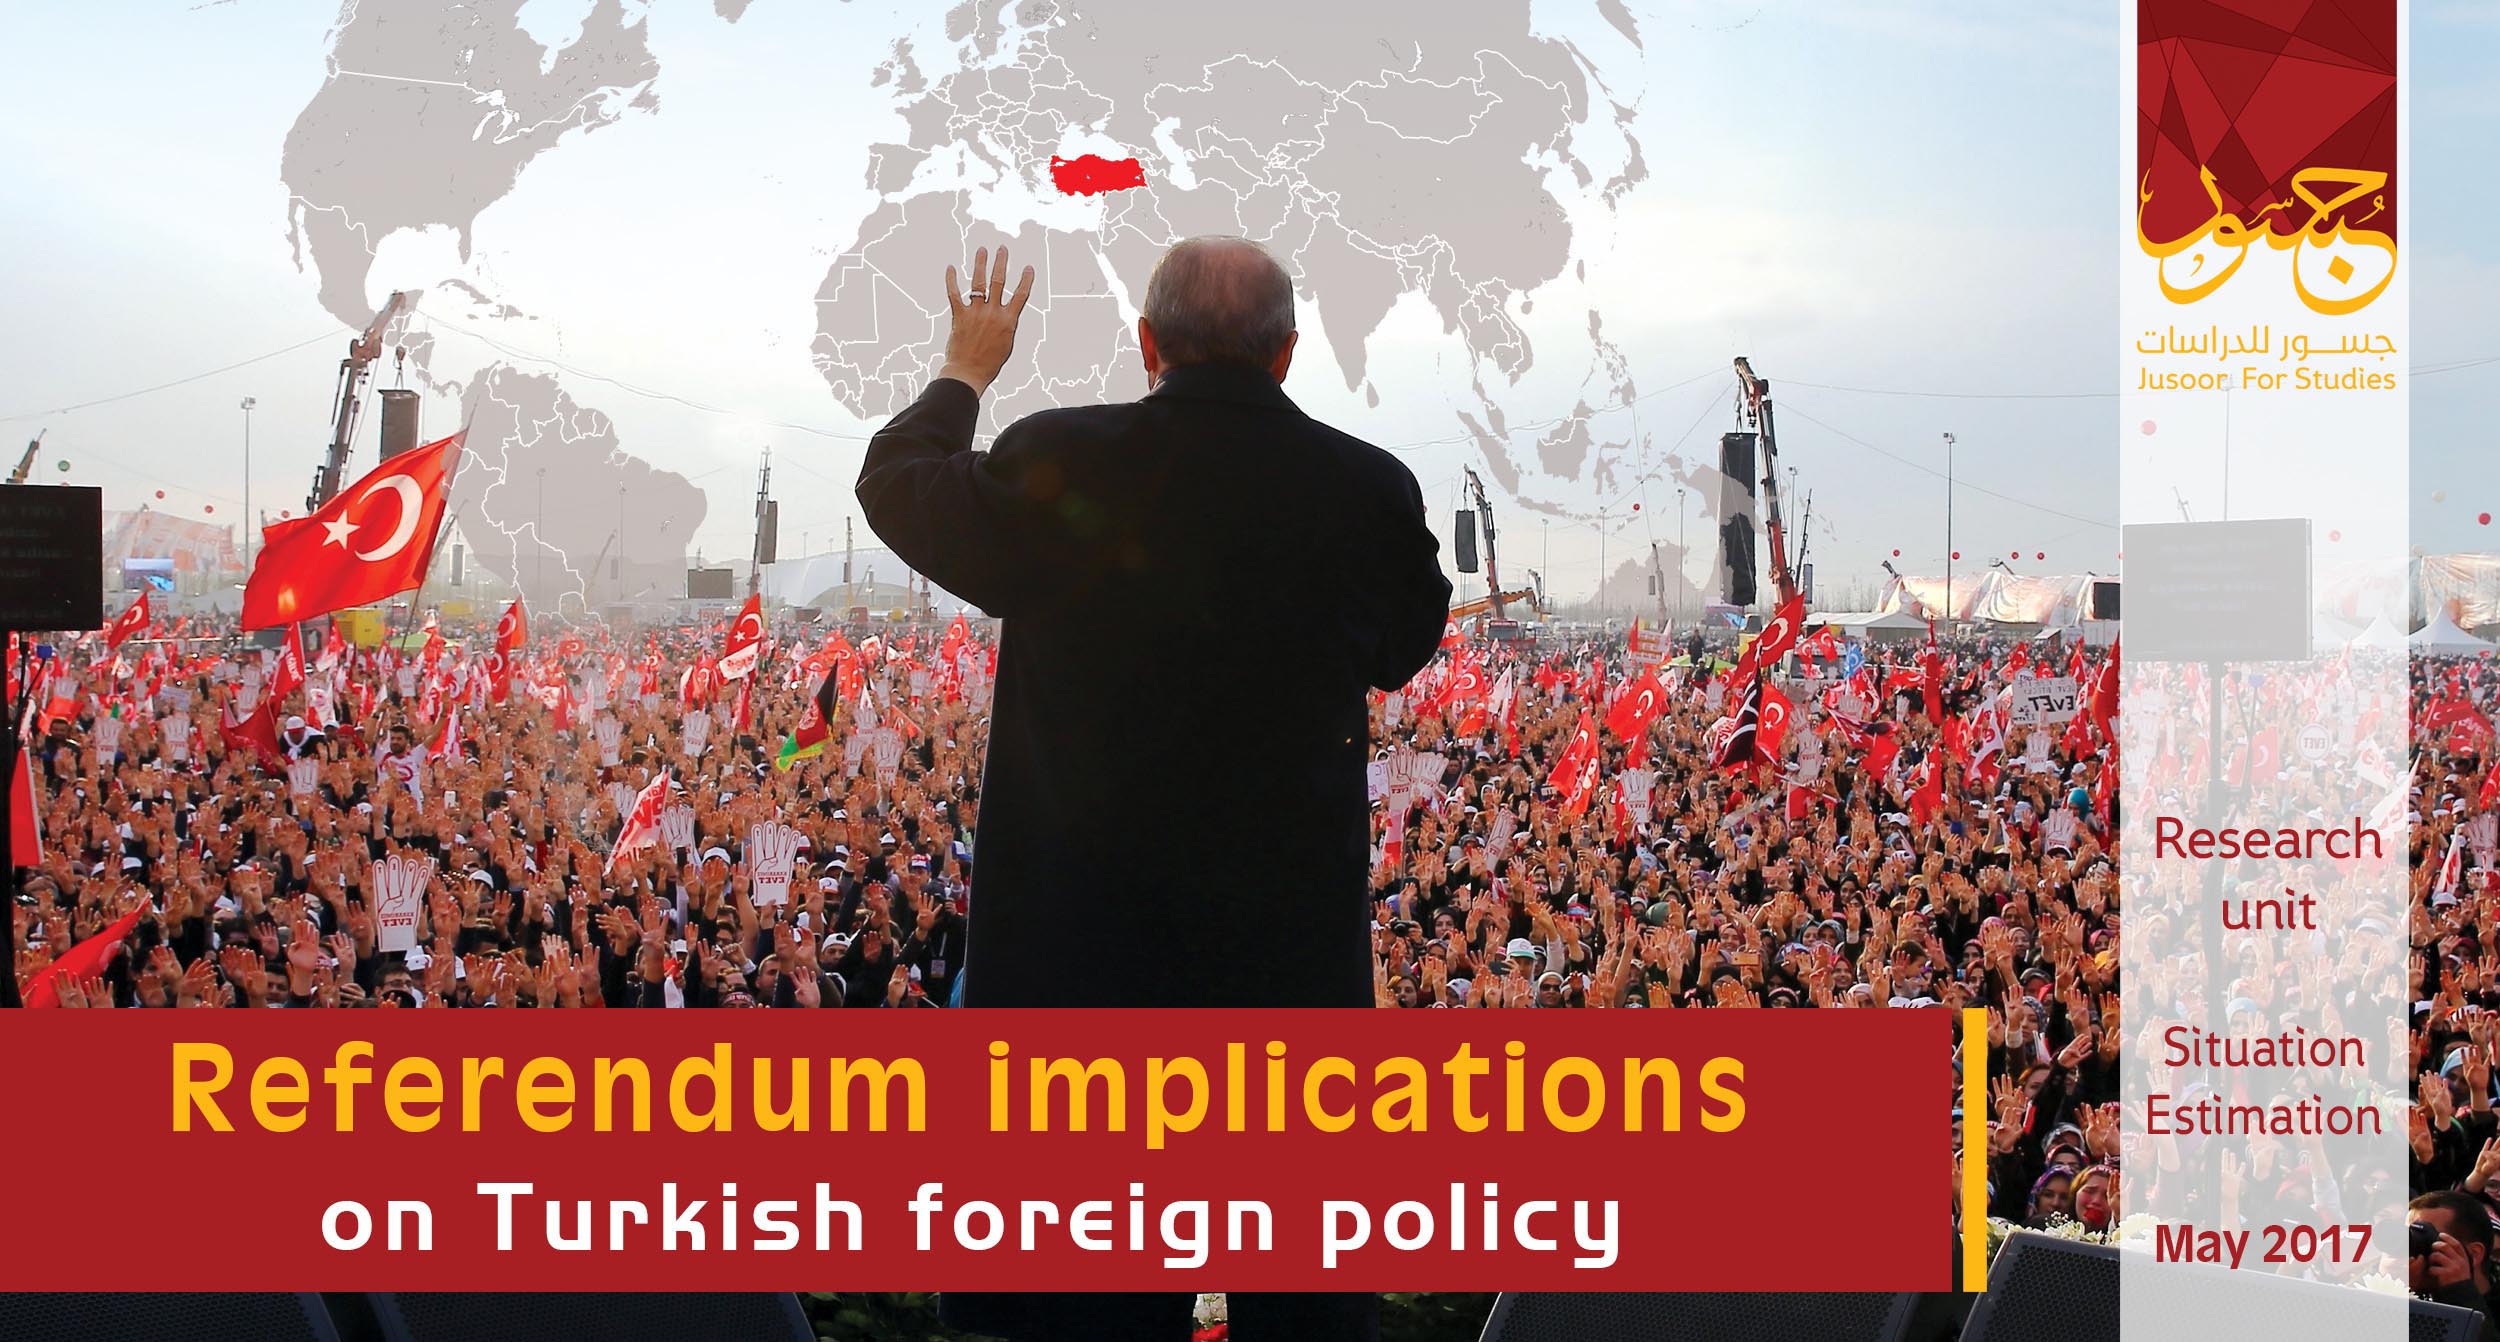 Referendum implications on Turkish foreign policy